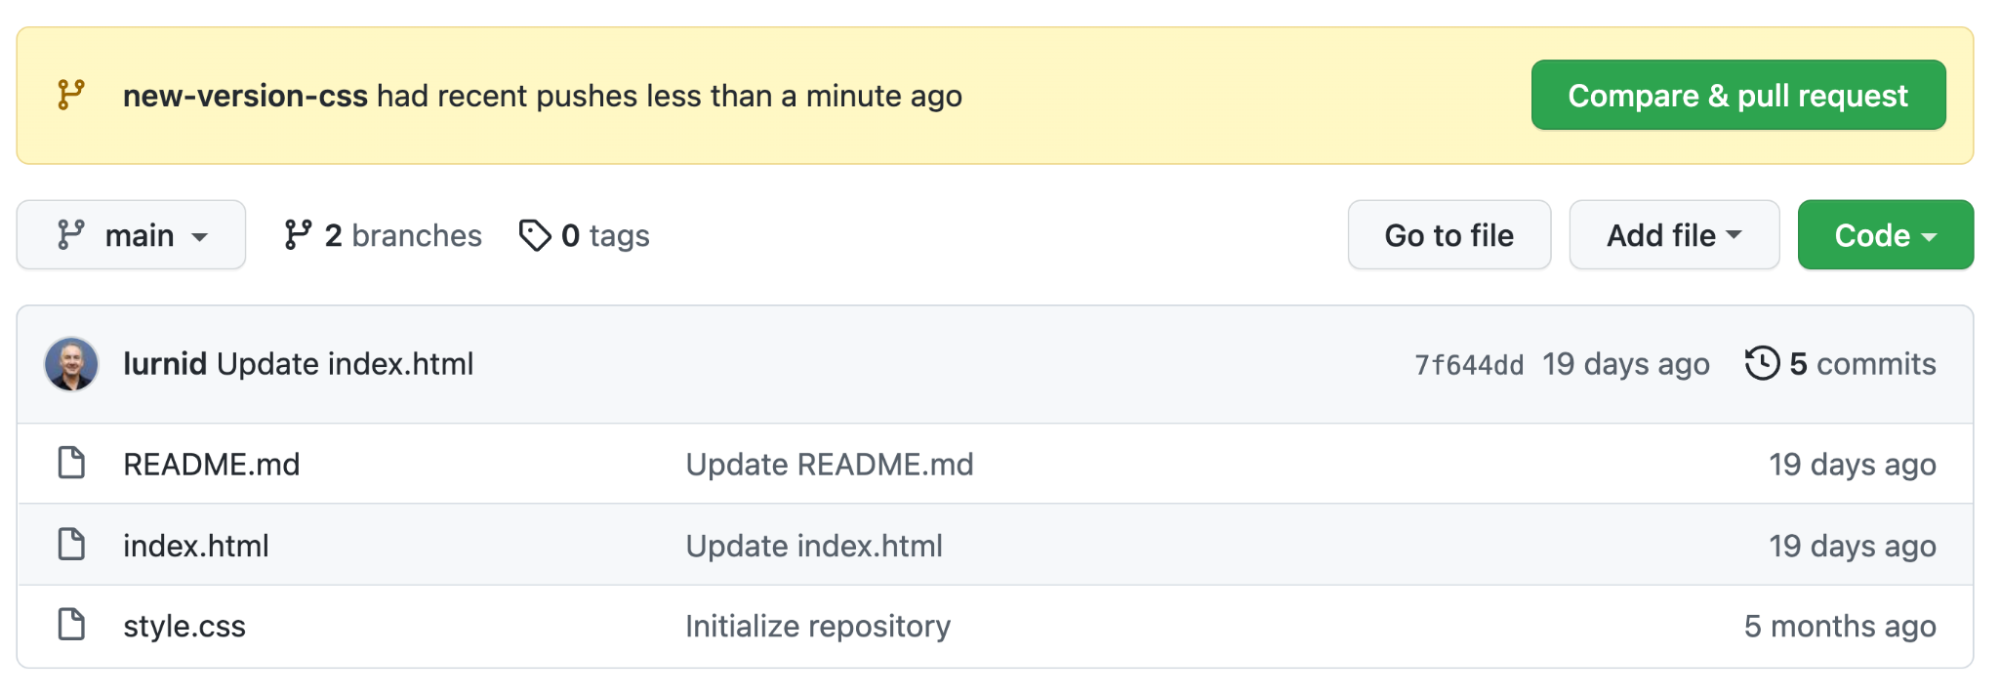 The button “Compare & pull request” suggests that you create a pull request